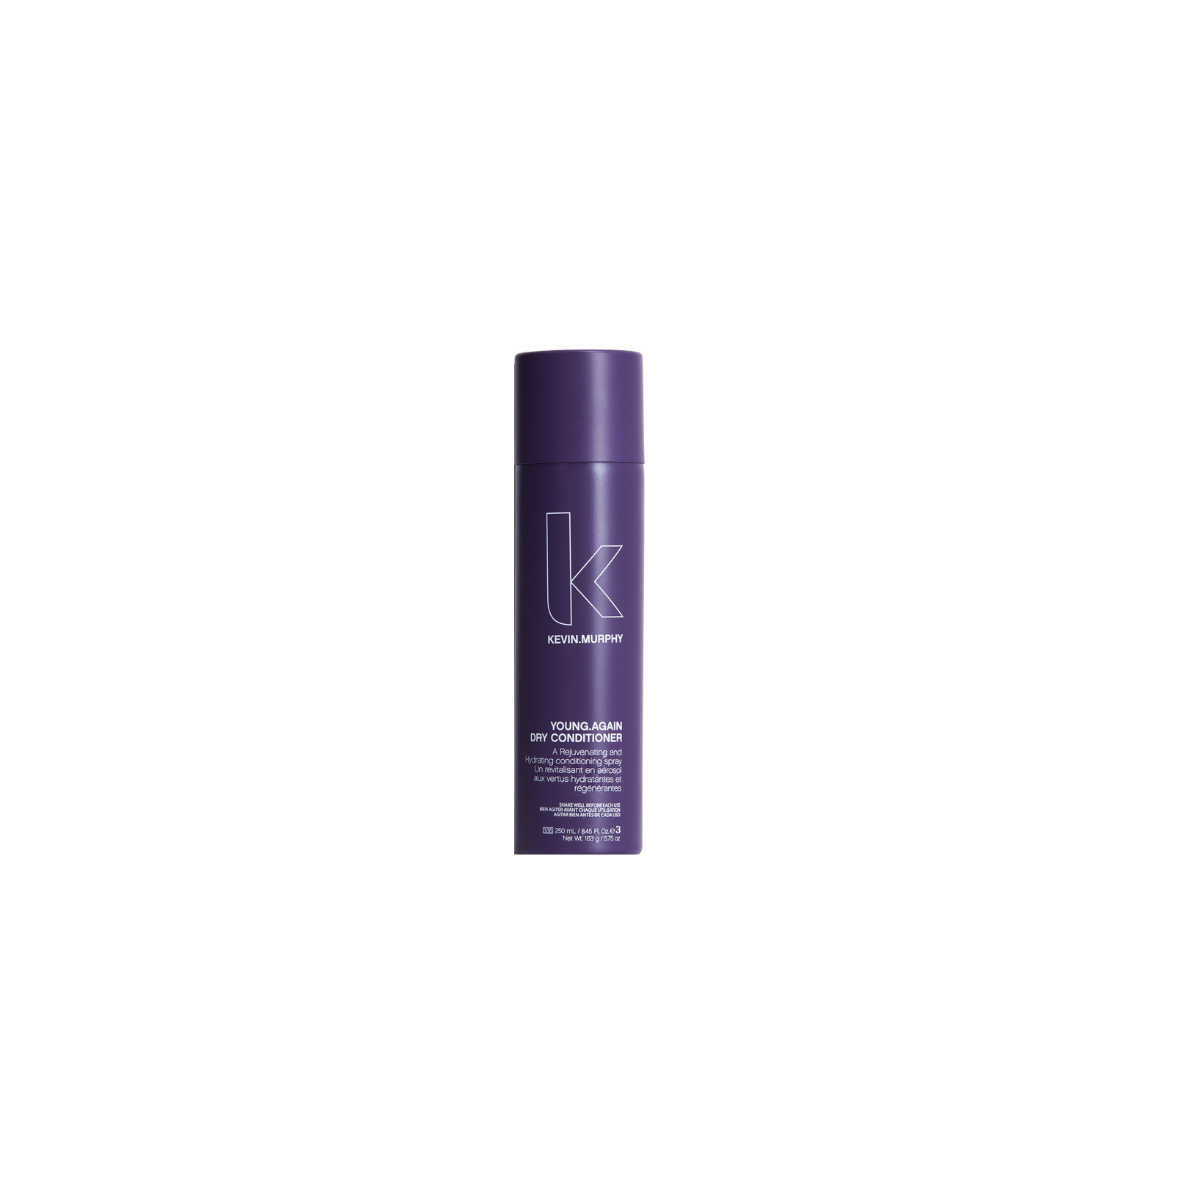 KEVIN MURPHY - YOUNG.AGAIN DRY CONDITIONER (250ml) Balsamo Spray secco